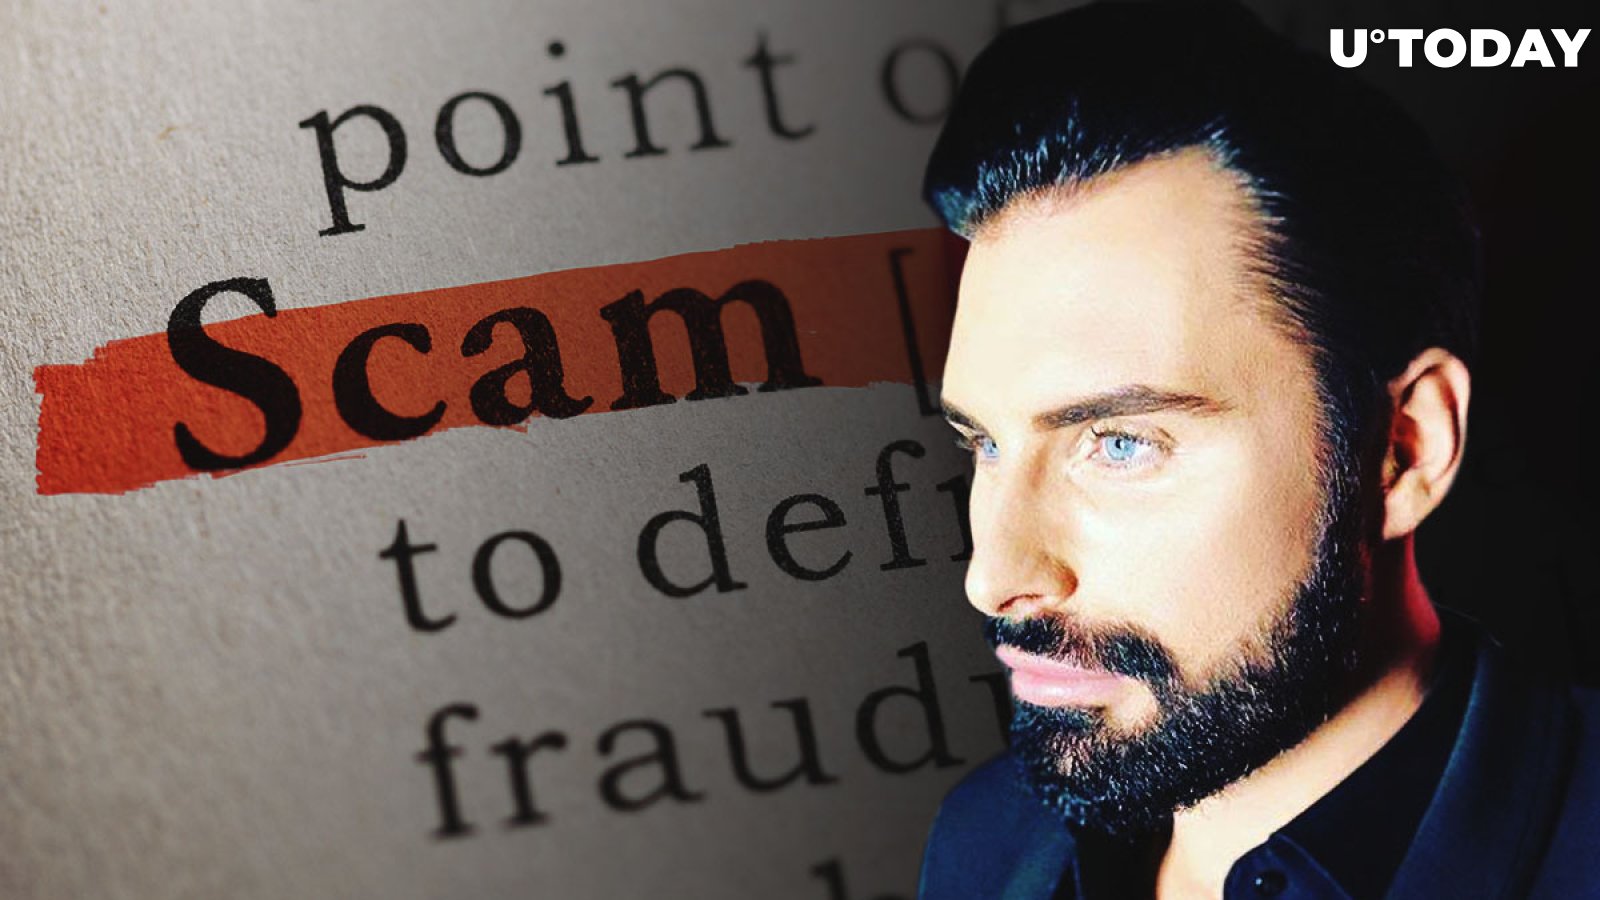 British TV Star Rylan Clark-Neal Gets Involved in Bitcoin (BTC) Scam. Read His Full Statement